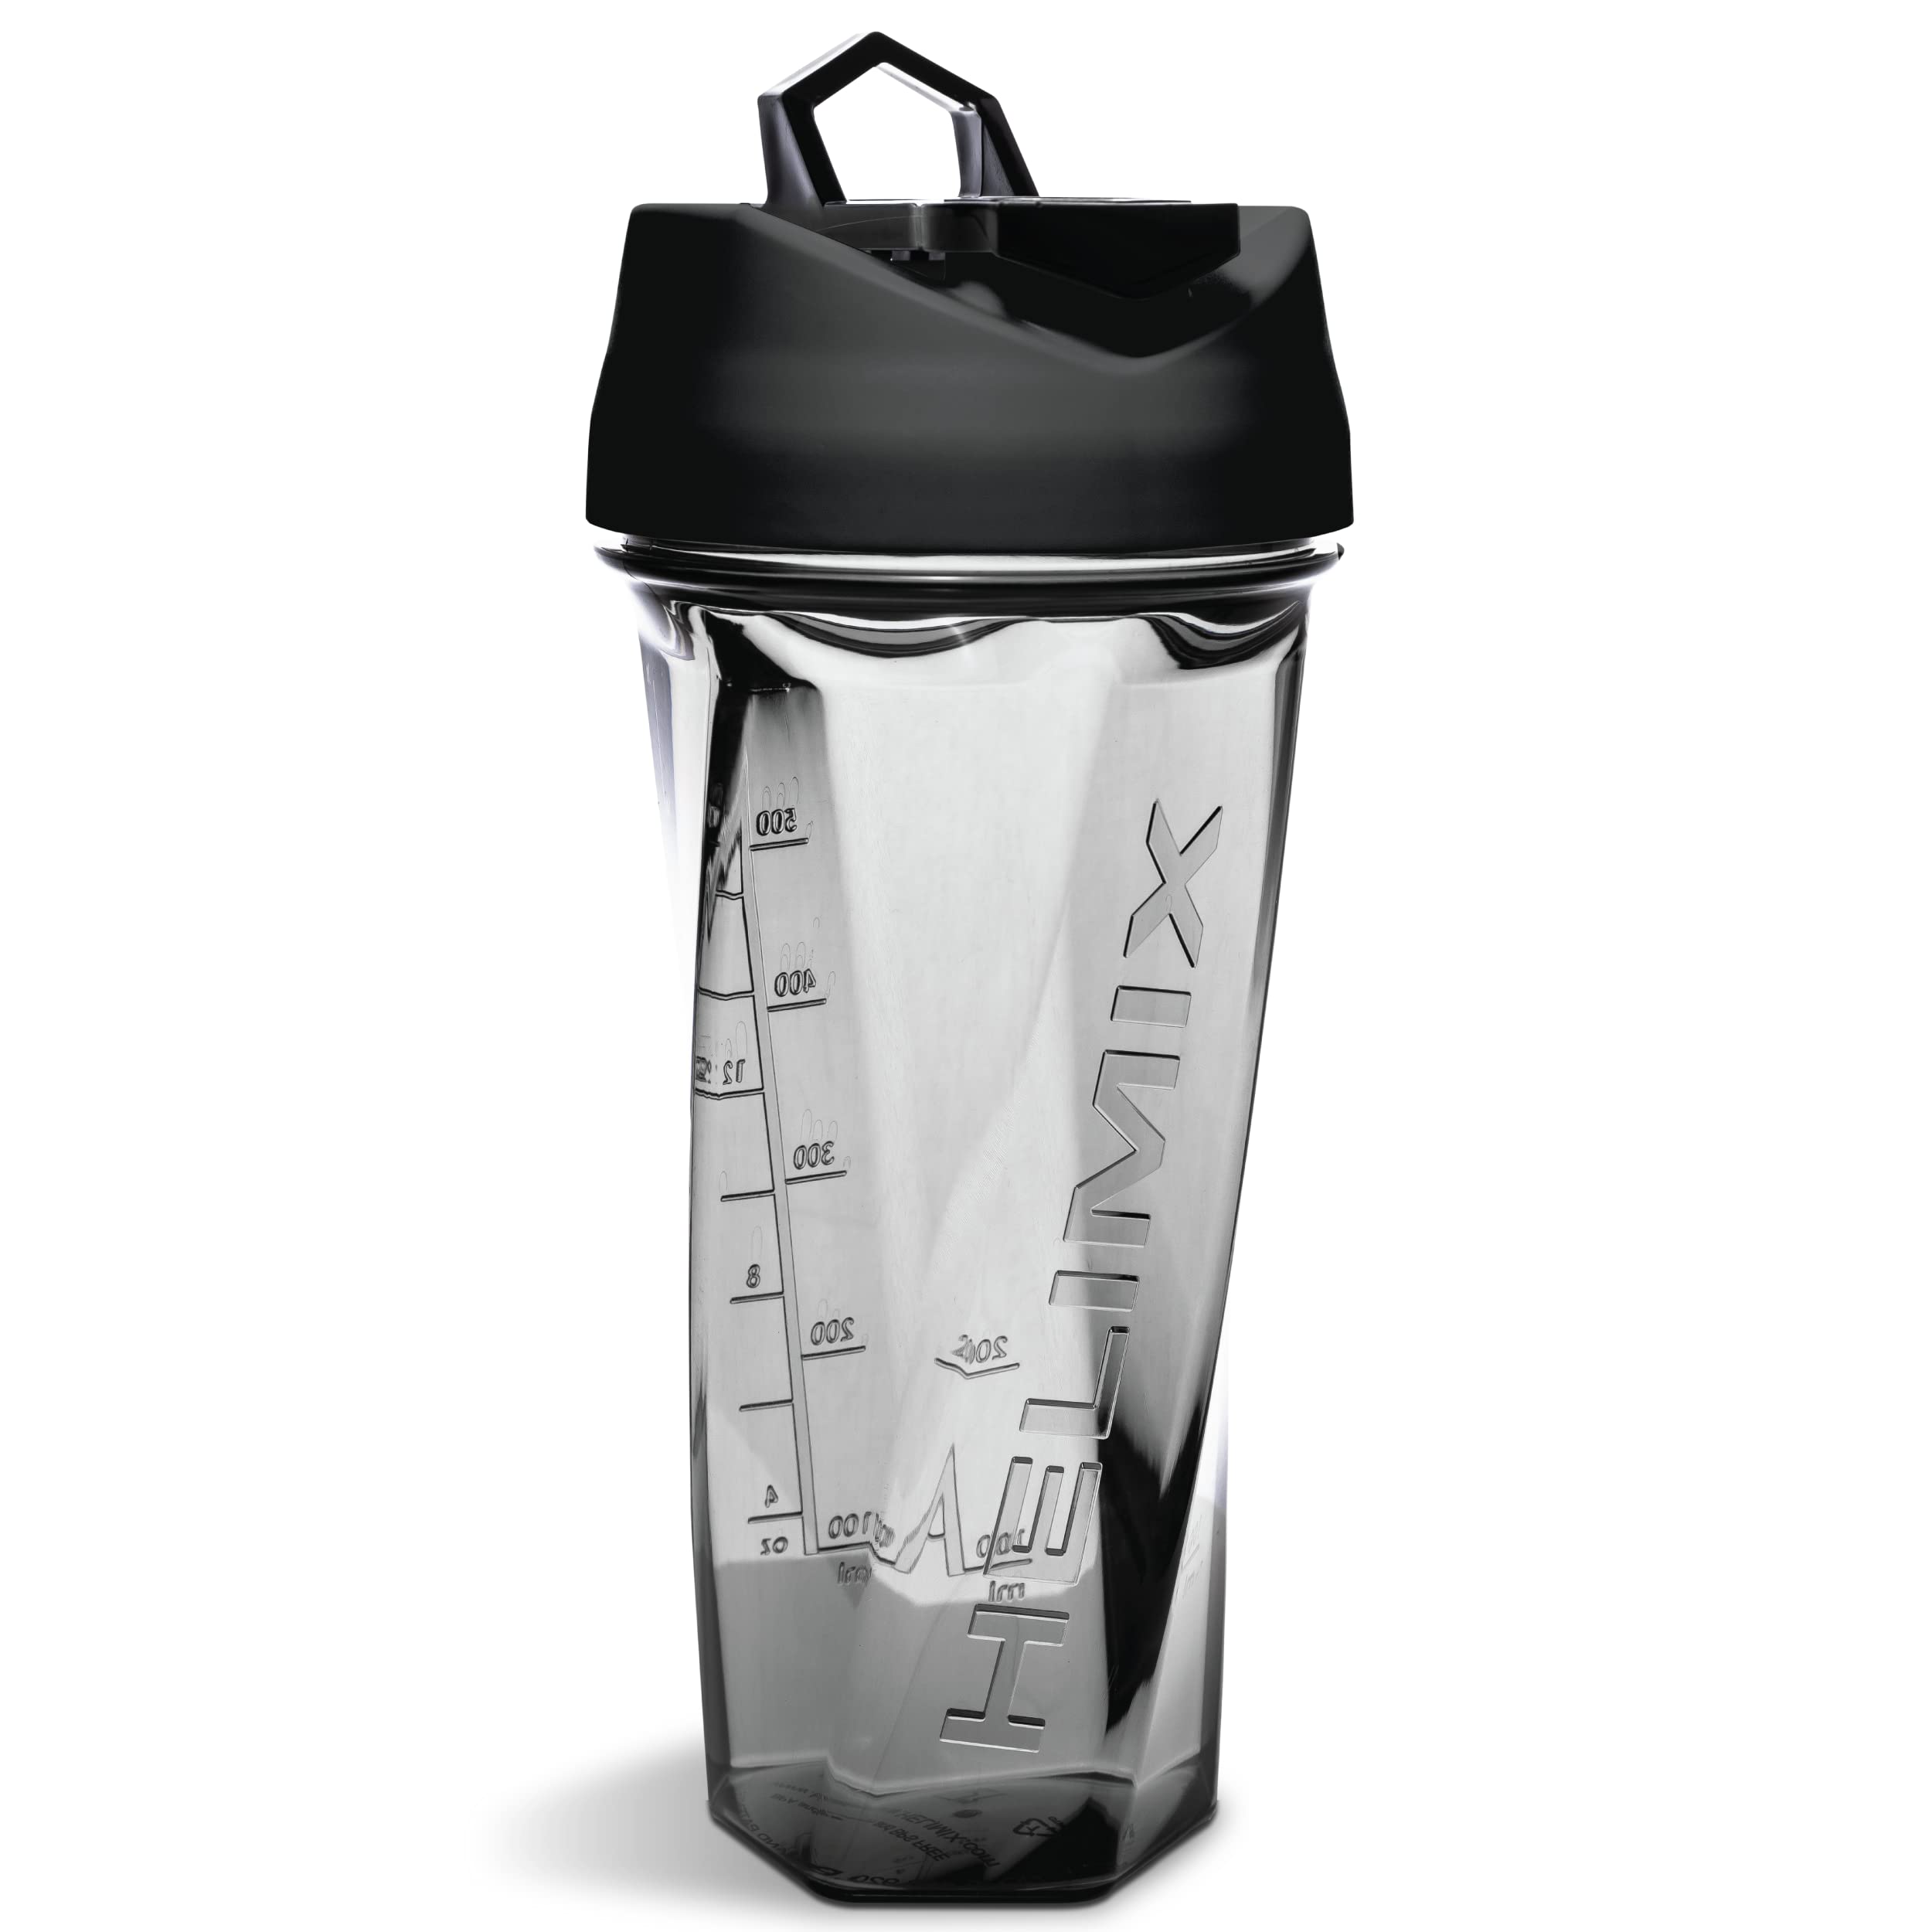 Helimix Vortex Blender Shaker Bottle 28oz | No Blending Ball or Whisk Needed | USA Made | Portable Pre Workout Whey Protein Drink Shaker Cup | Mixes Cocktails Smoothies Shakes | Dishwasher Safe